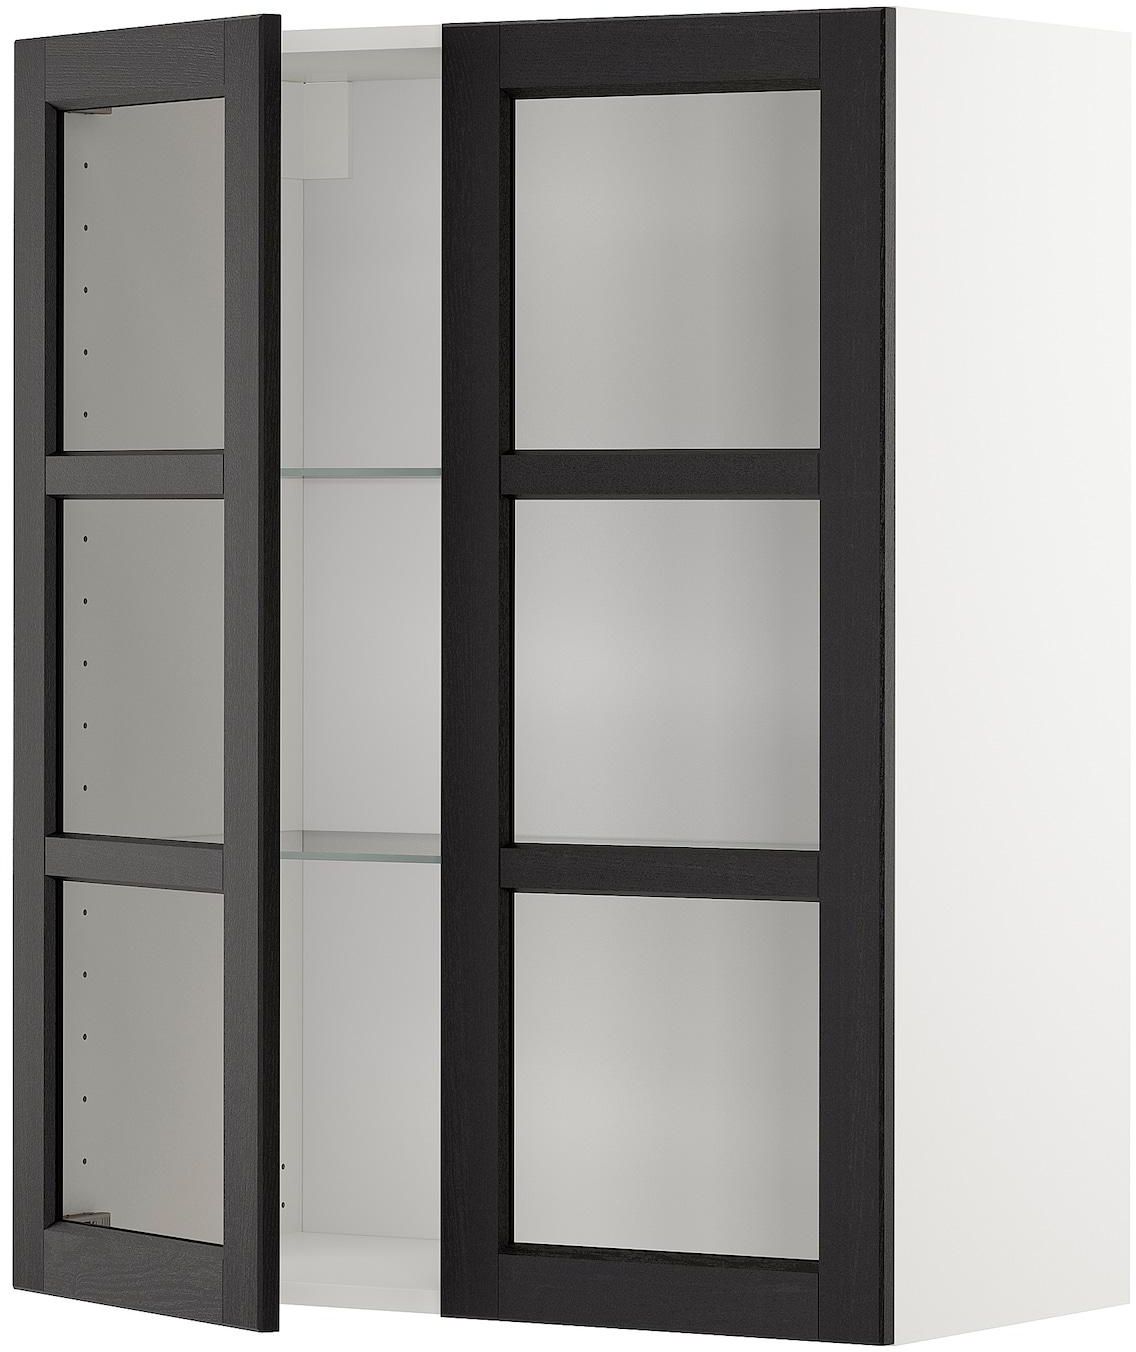 METOD Wall cabinet w shelves/2 glass drs - white/Lerhyttan black stained 80x100 cm